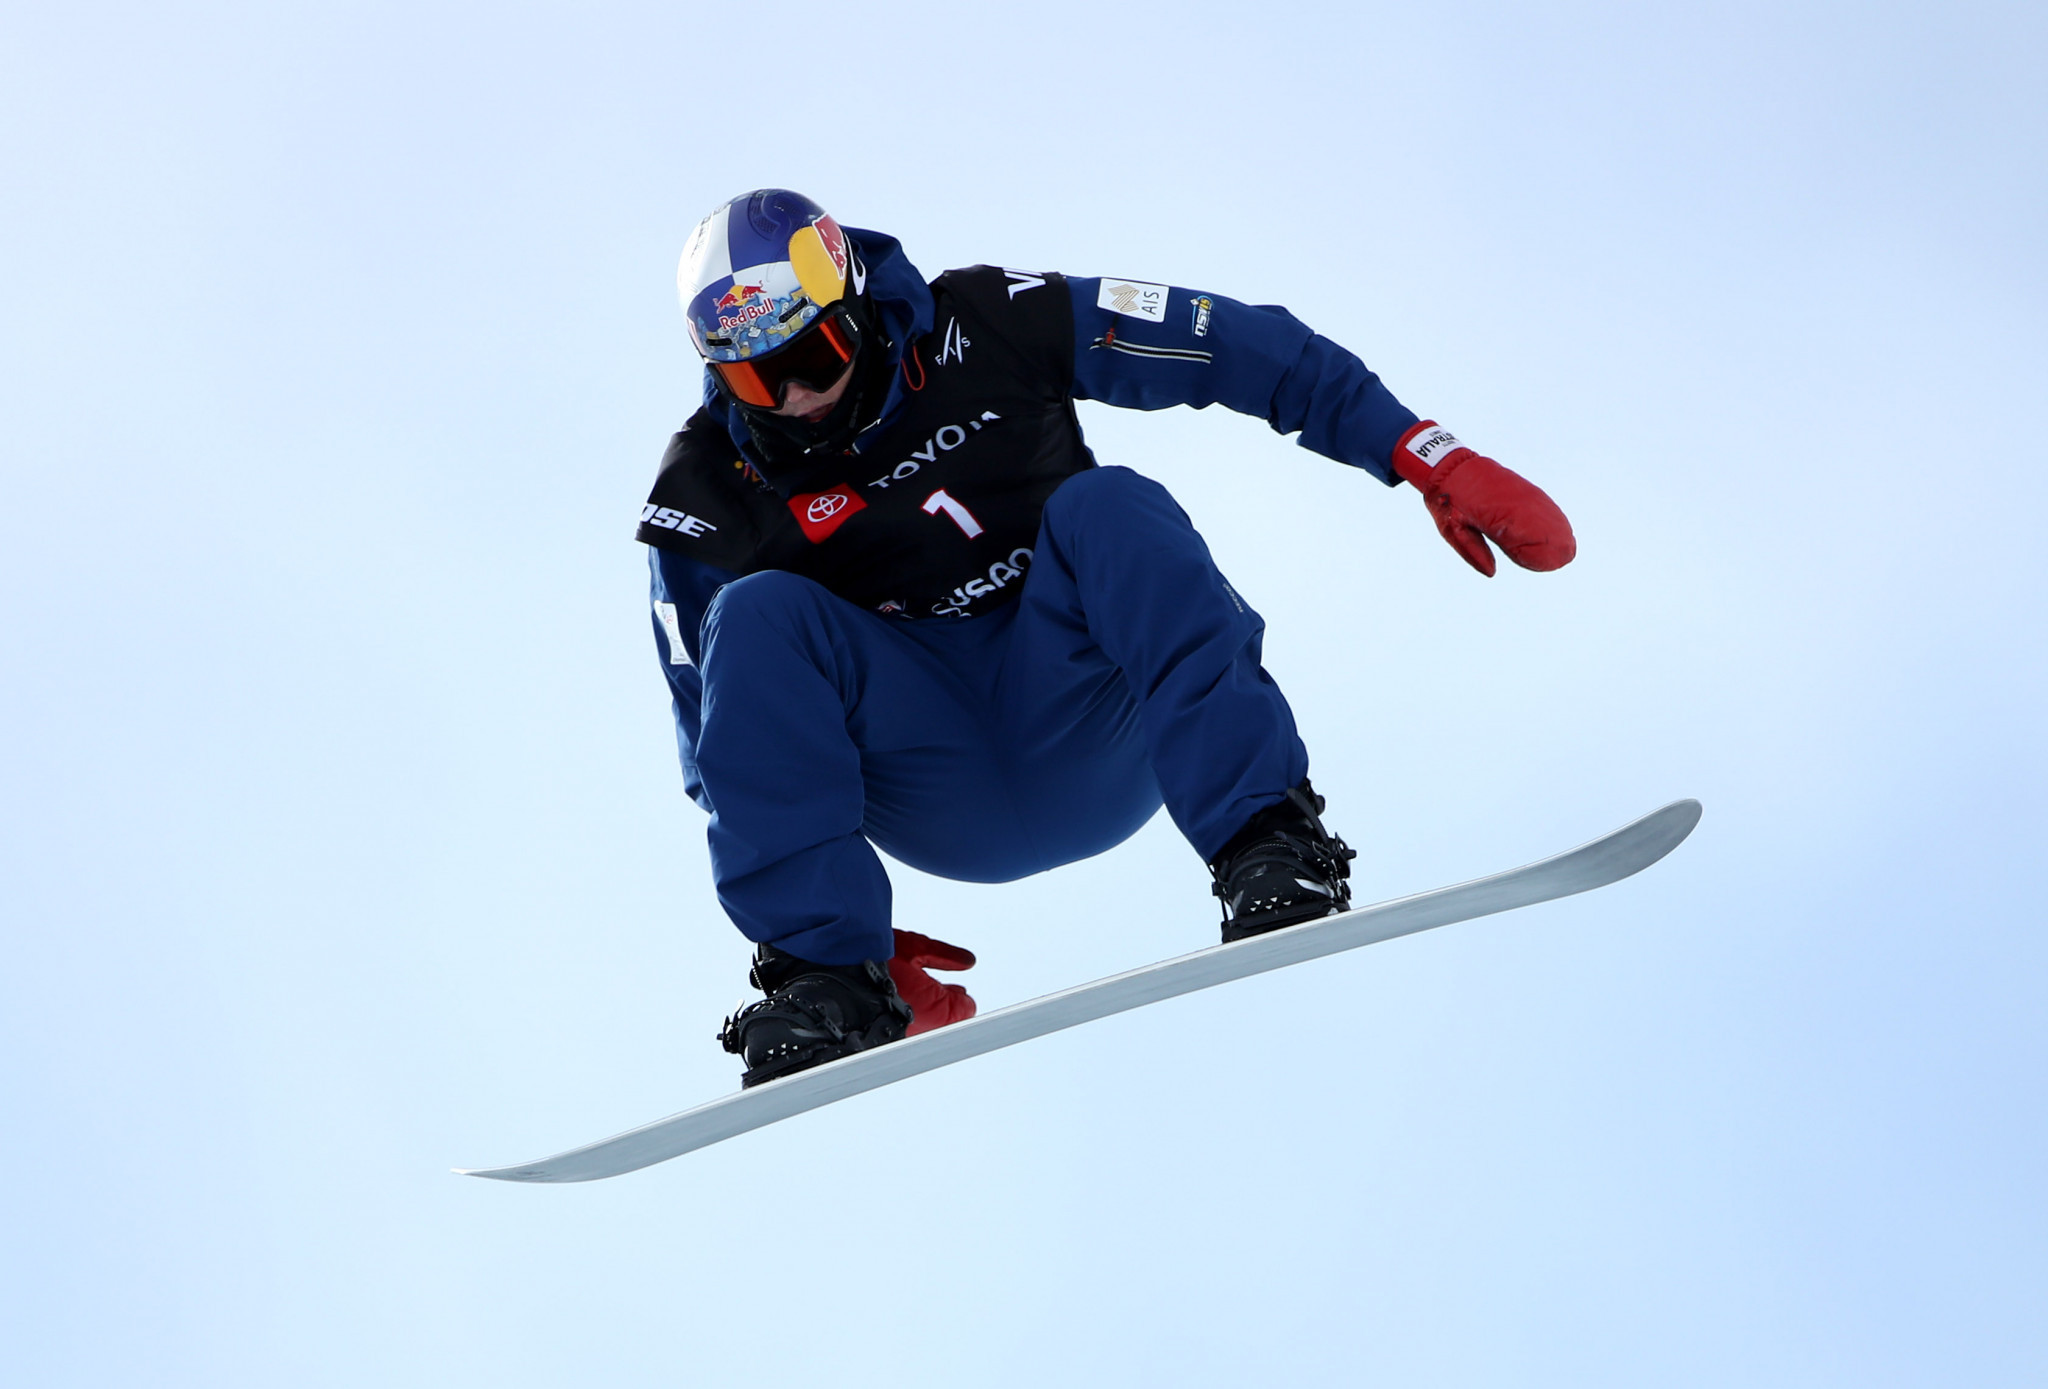 Currently heading the men's snowboard halfpipe World Cup standings is Australia’s Scotty James ©Getty Images